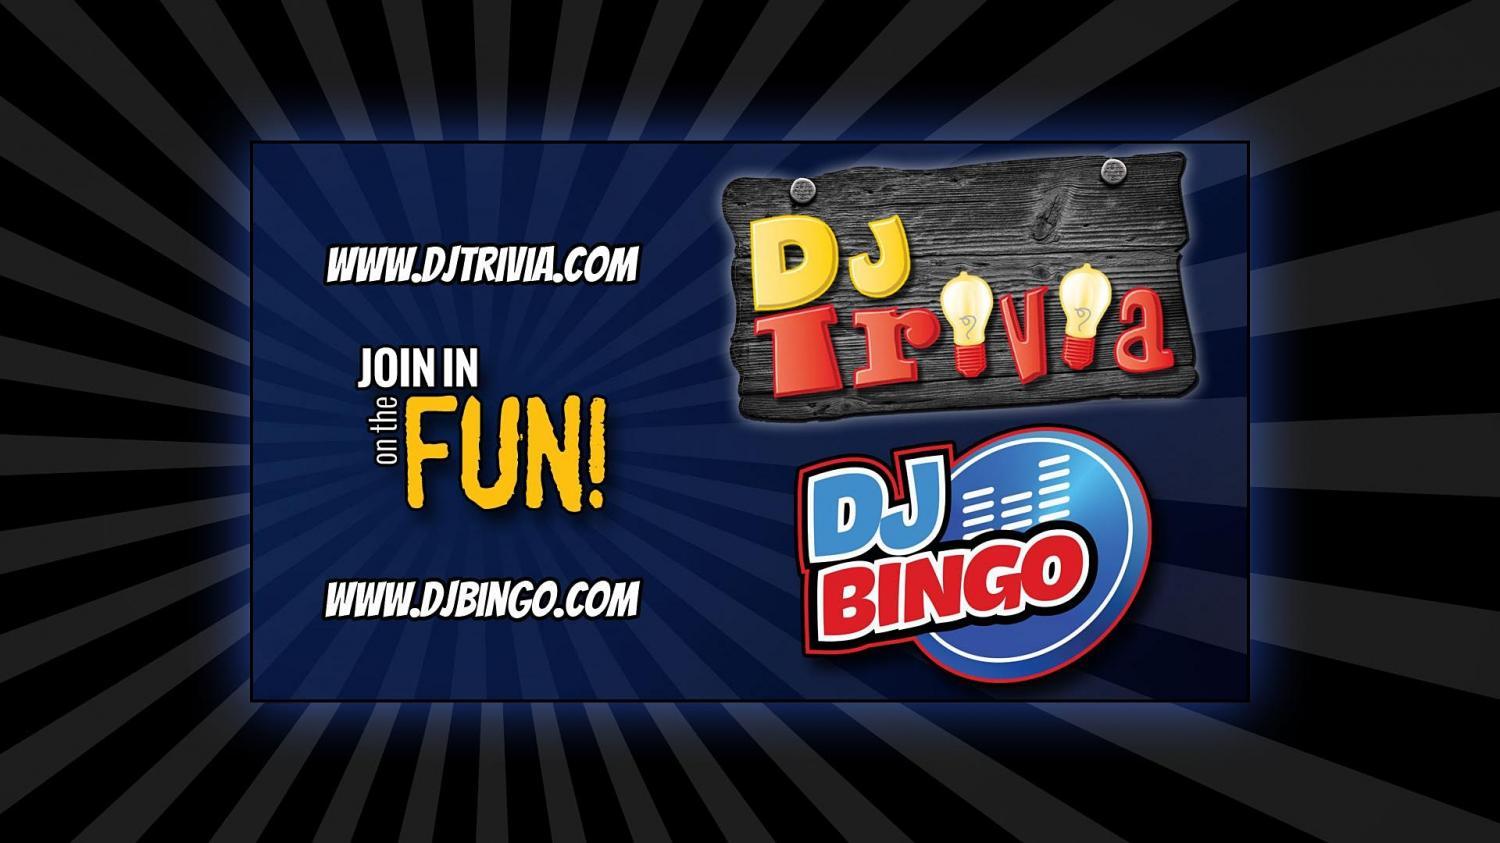 Play DJ Bingo FREE in Weirsdale - County Line Smokehouse & Spirits
Wed Oct 19, 7:00 PM - Wed Oct 19, 8:30 PM